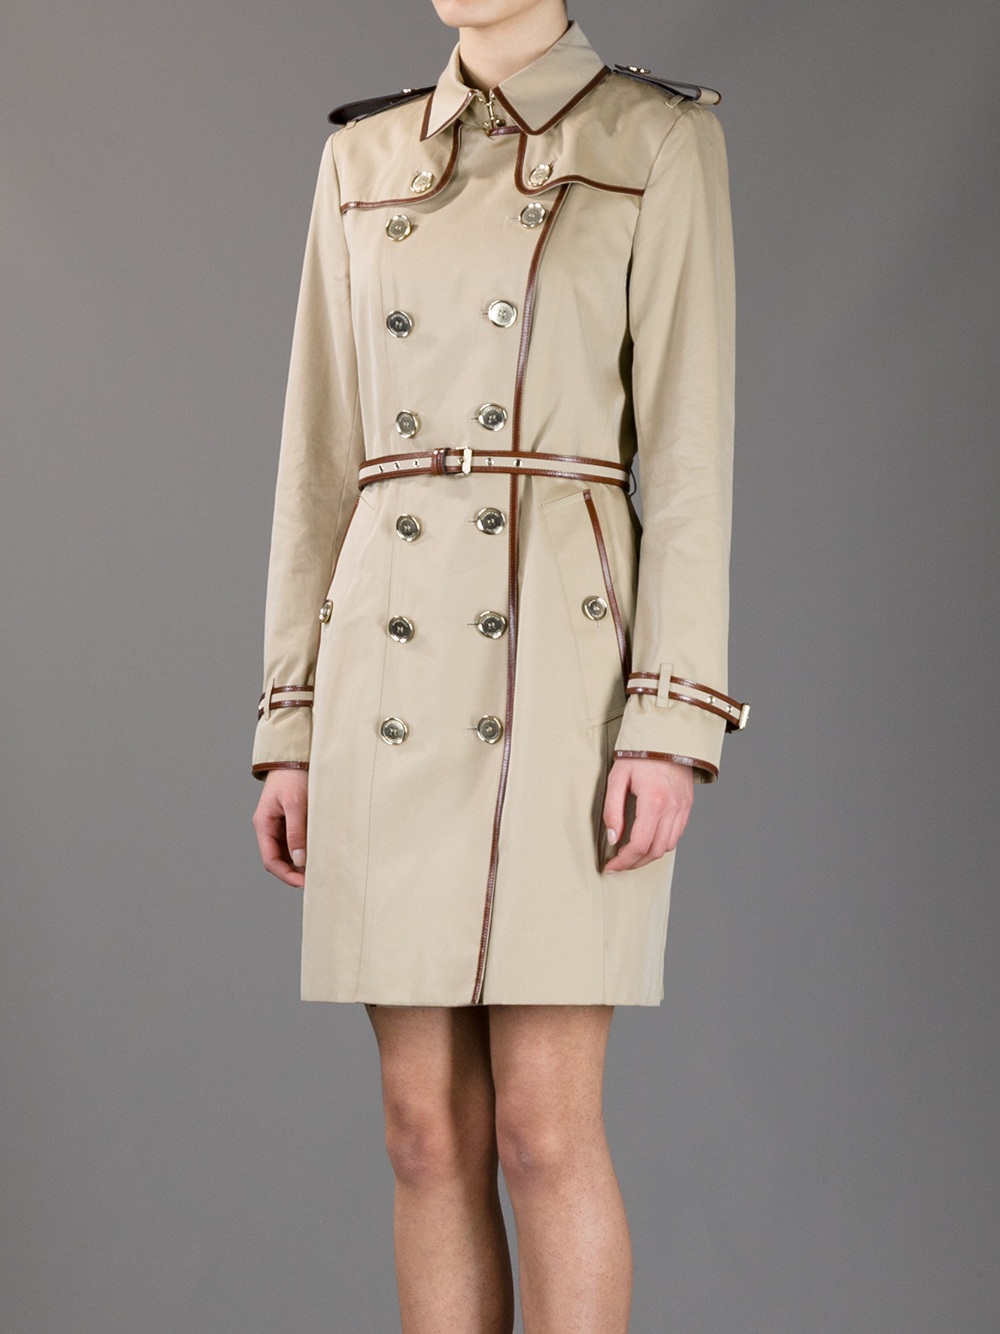 Burberry Trench Coat in Beige (Natural) - Lyst